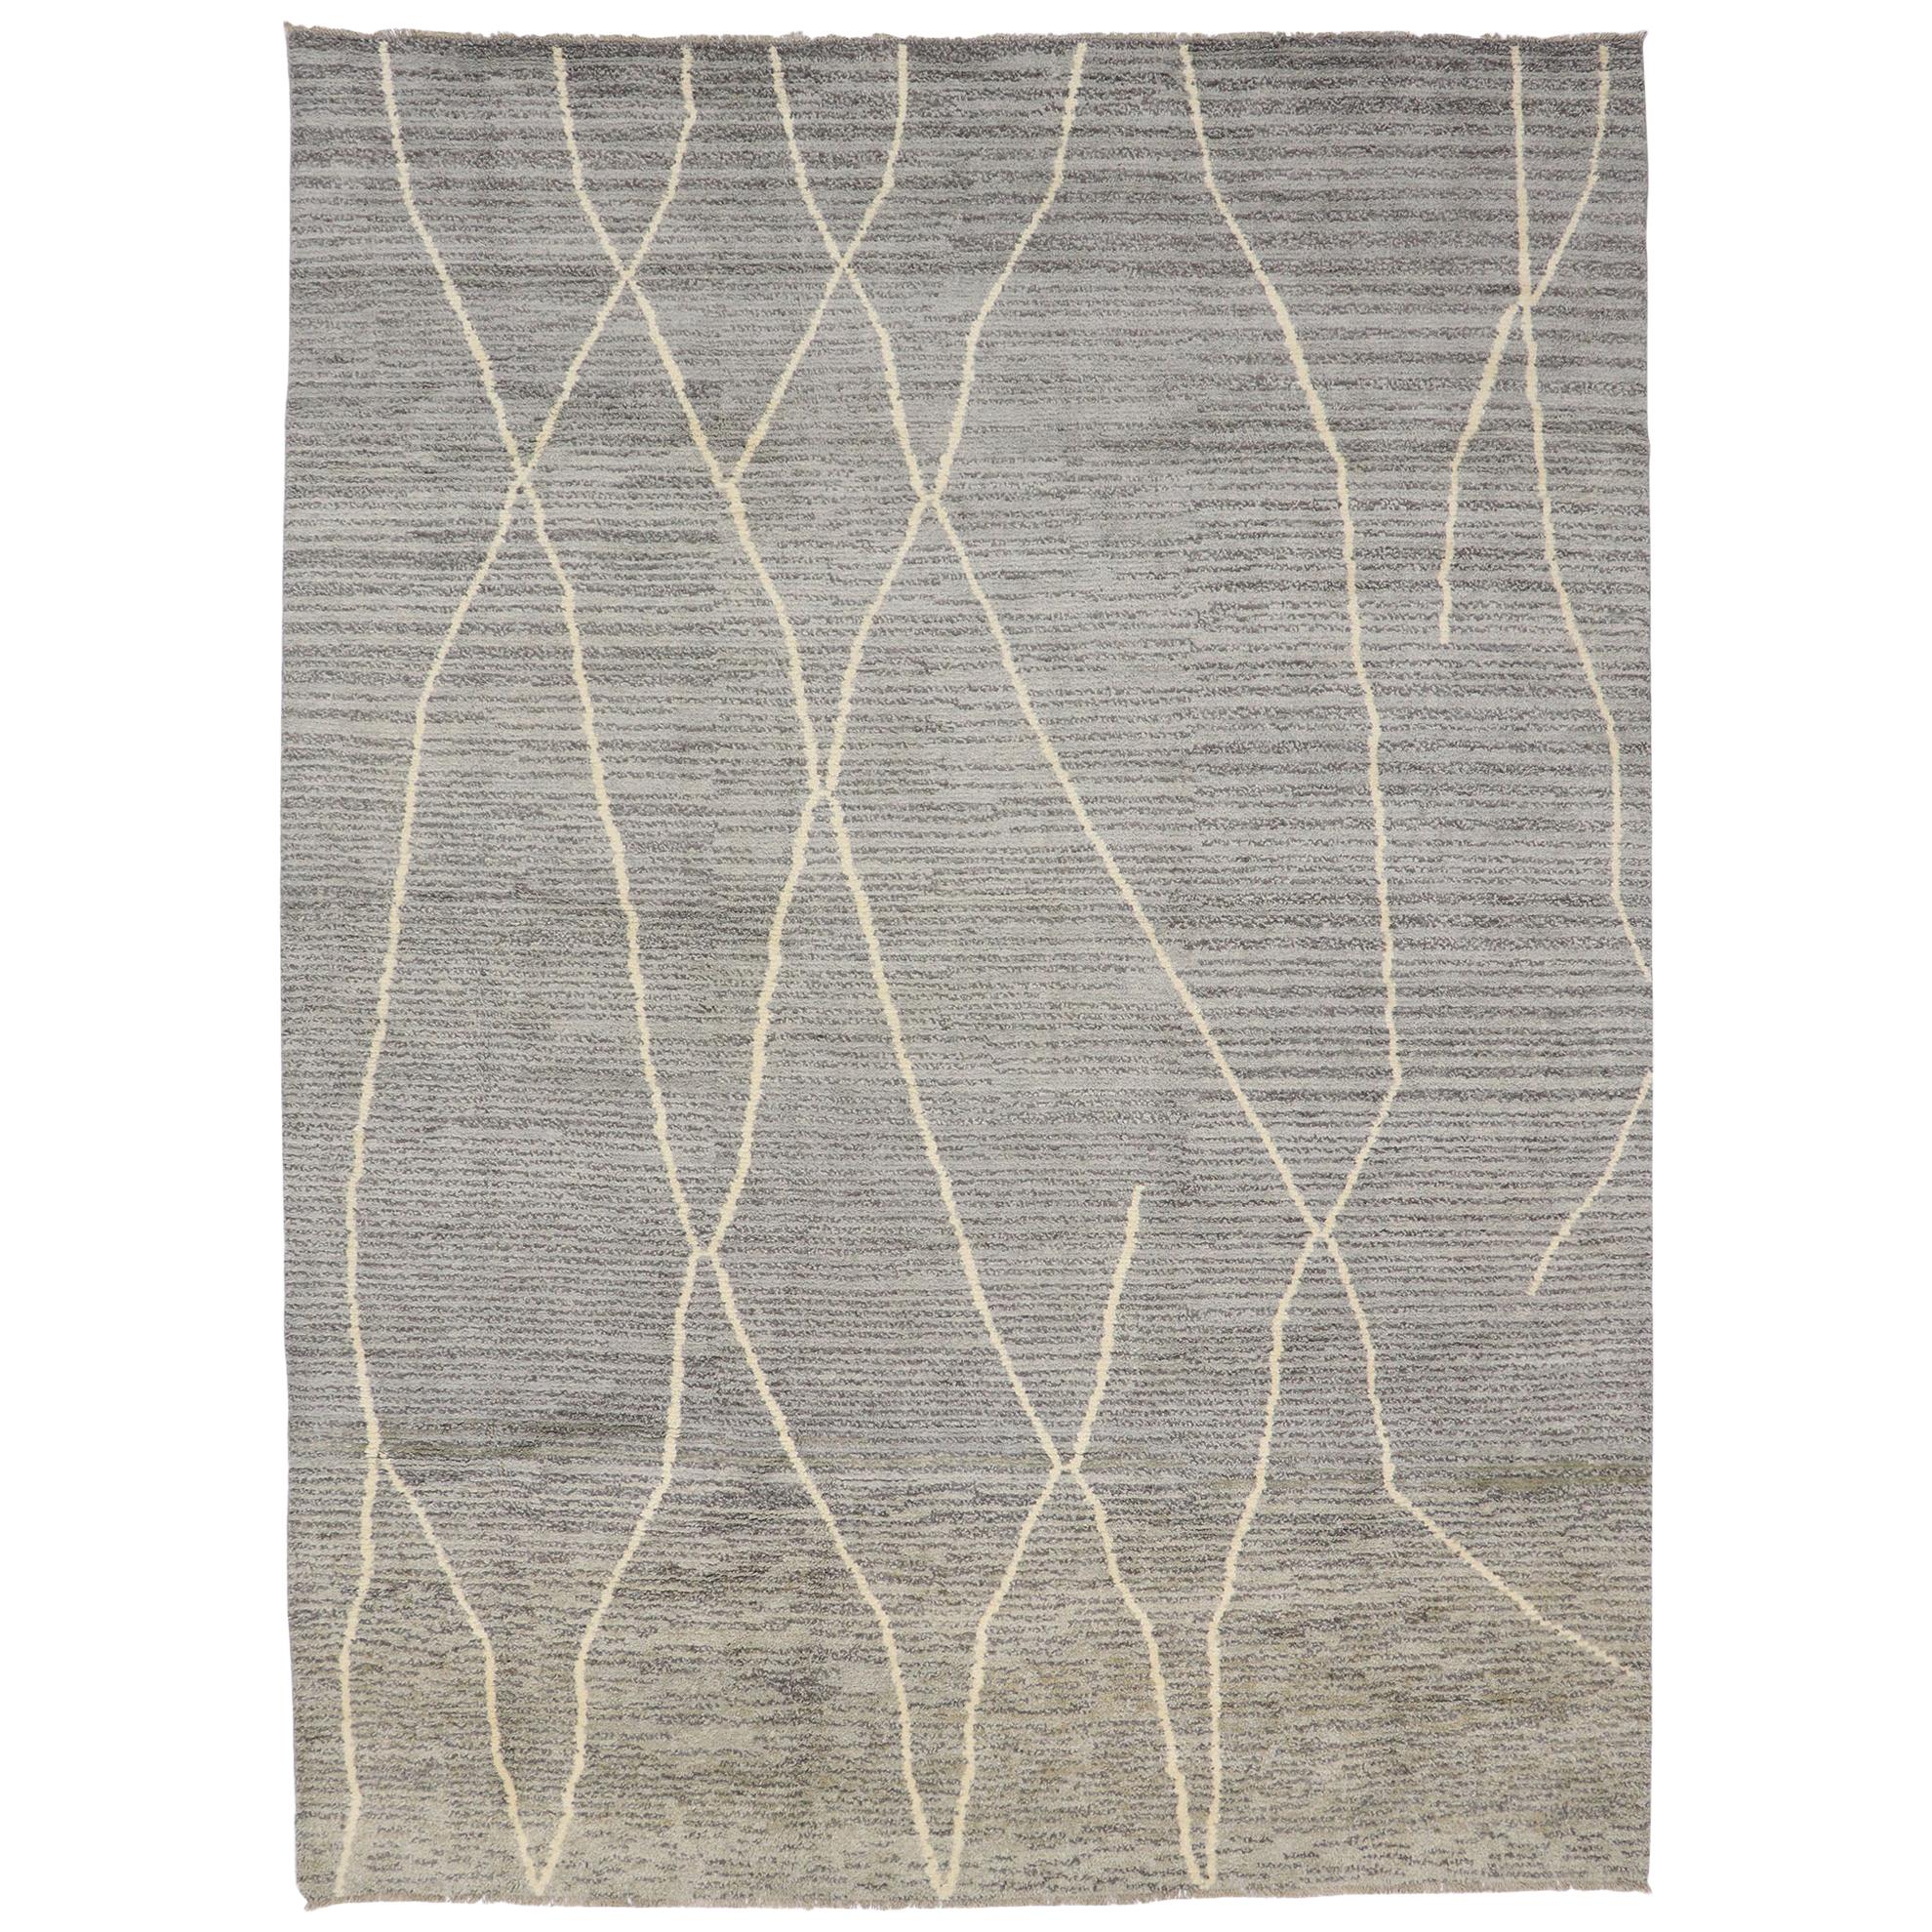 New Contemporary Gray Moroccan Rug with Modern Swedish Mysigt Style